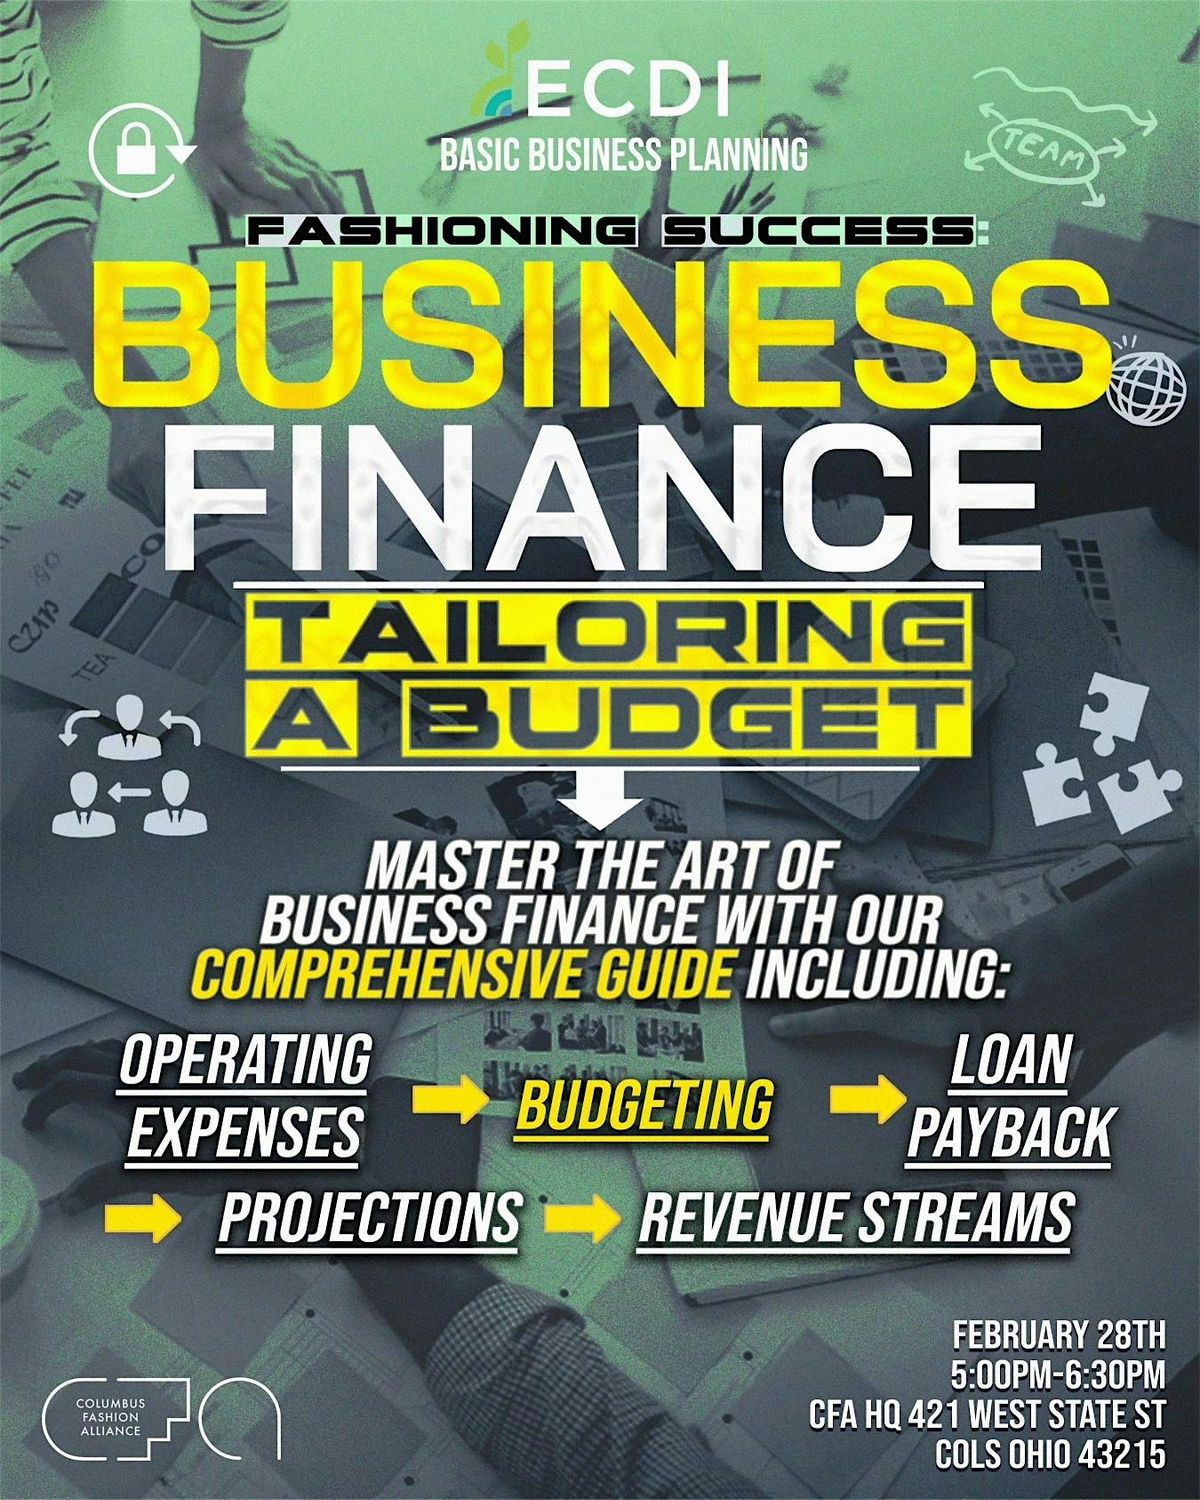 Tailoring a Budget: Business Finance How-To with ECDI